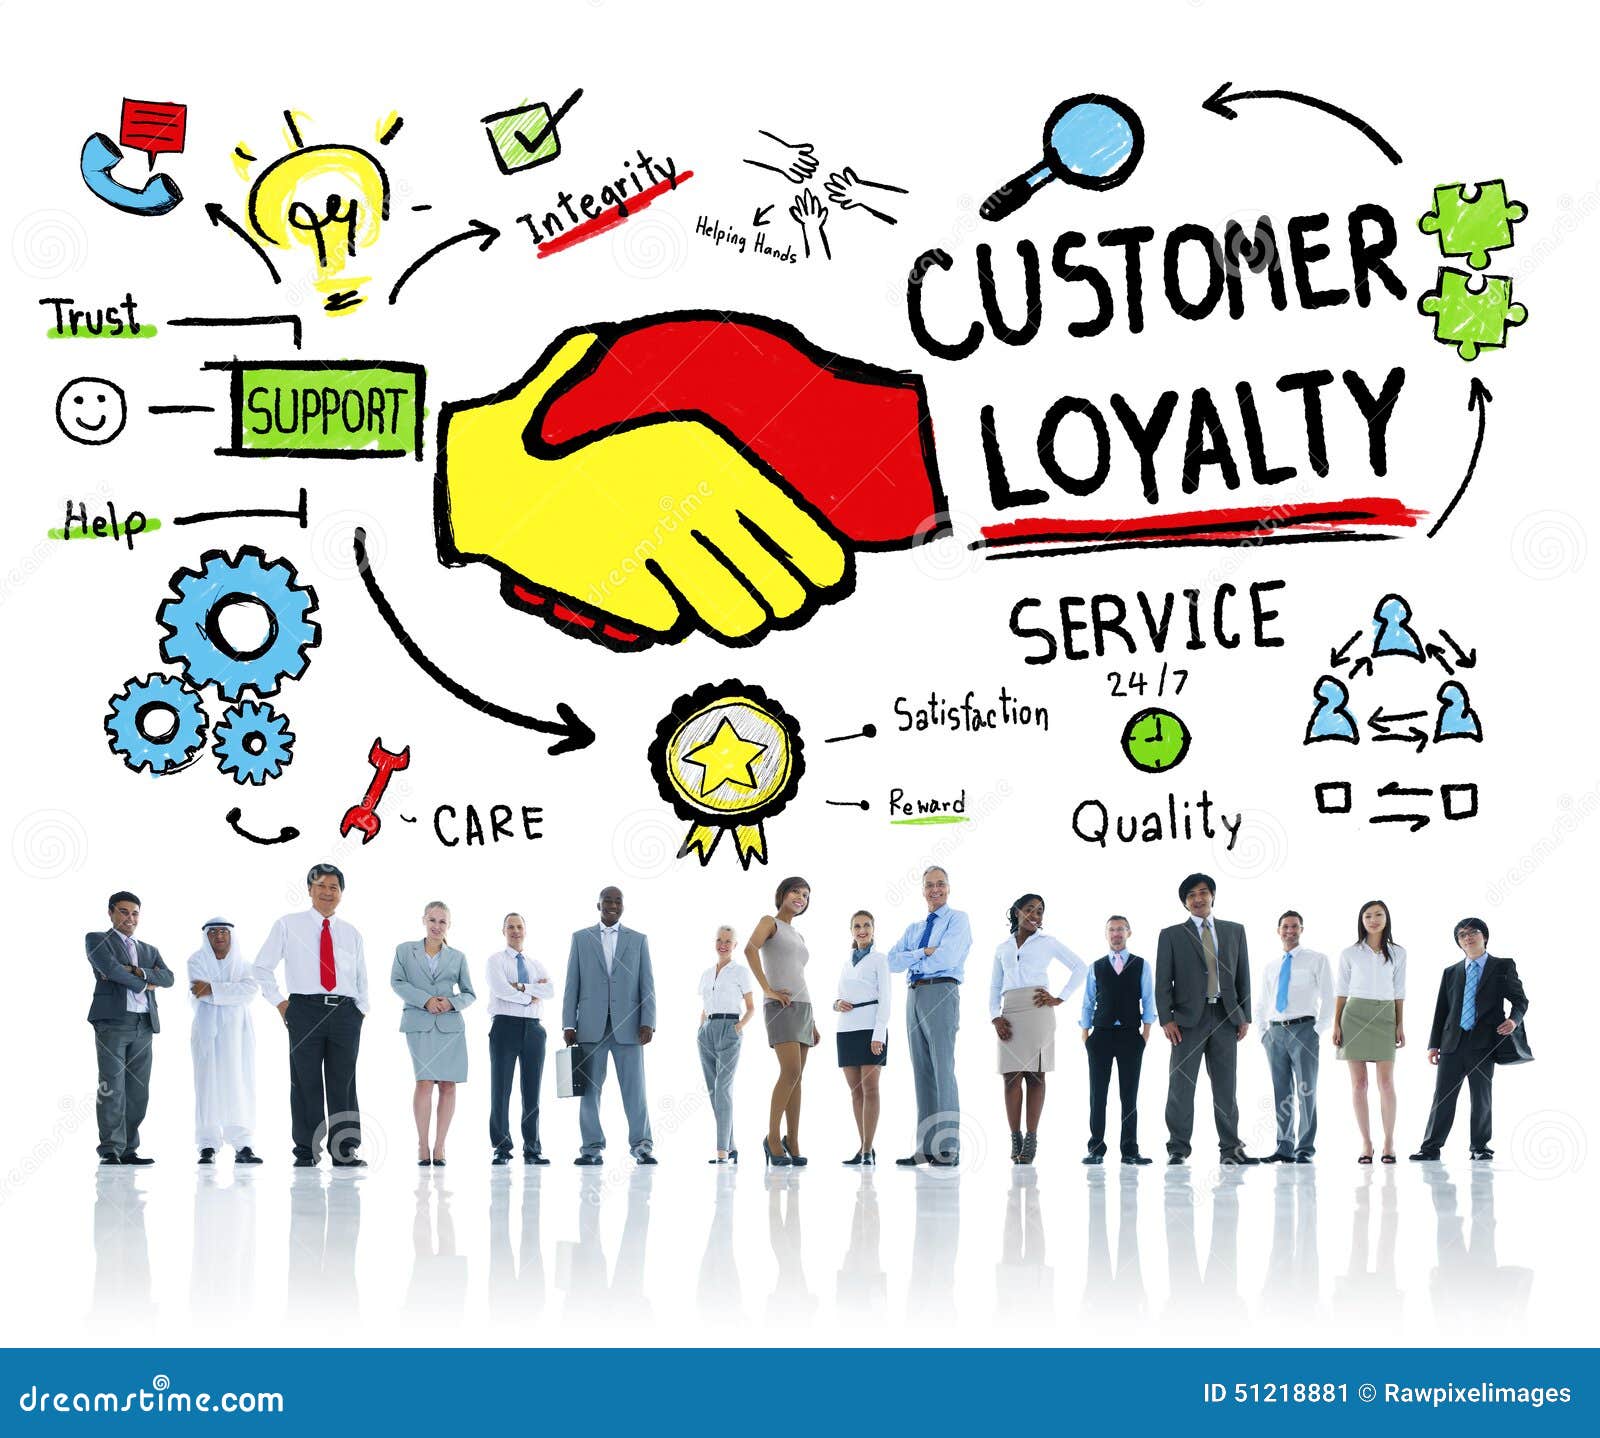 customer loyalty service support care trust business concept